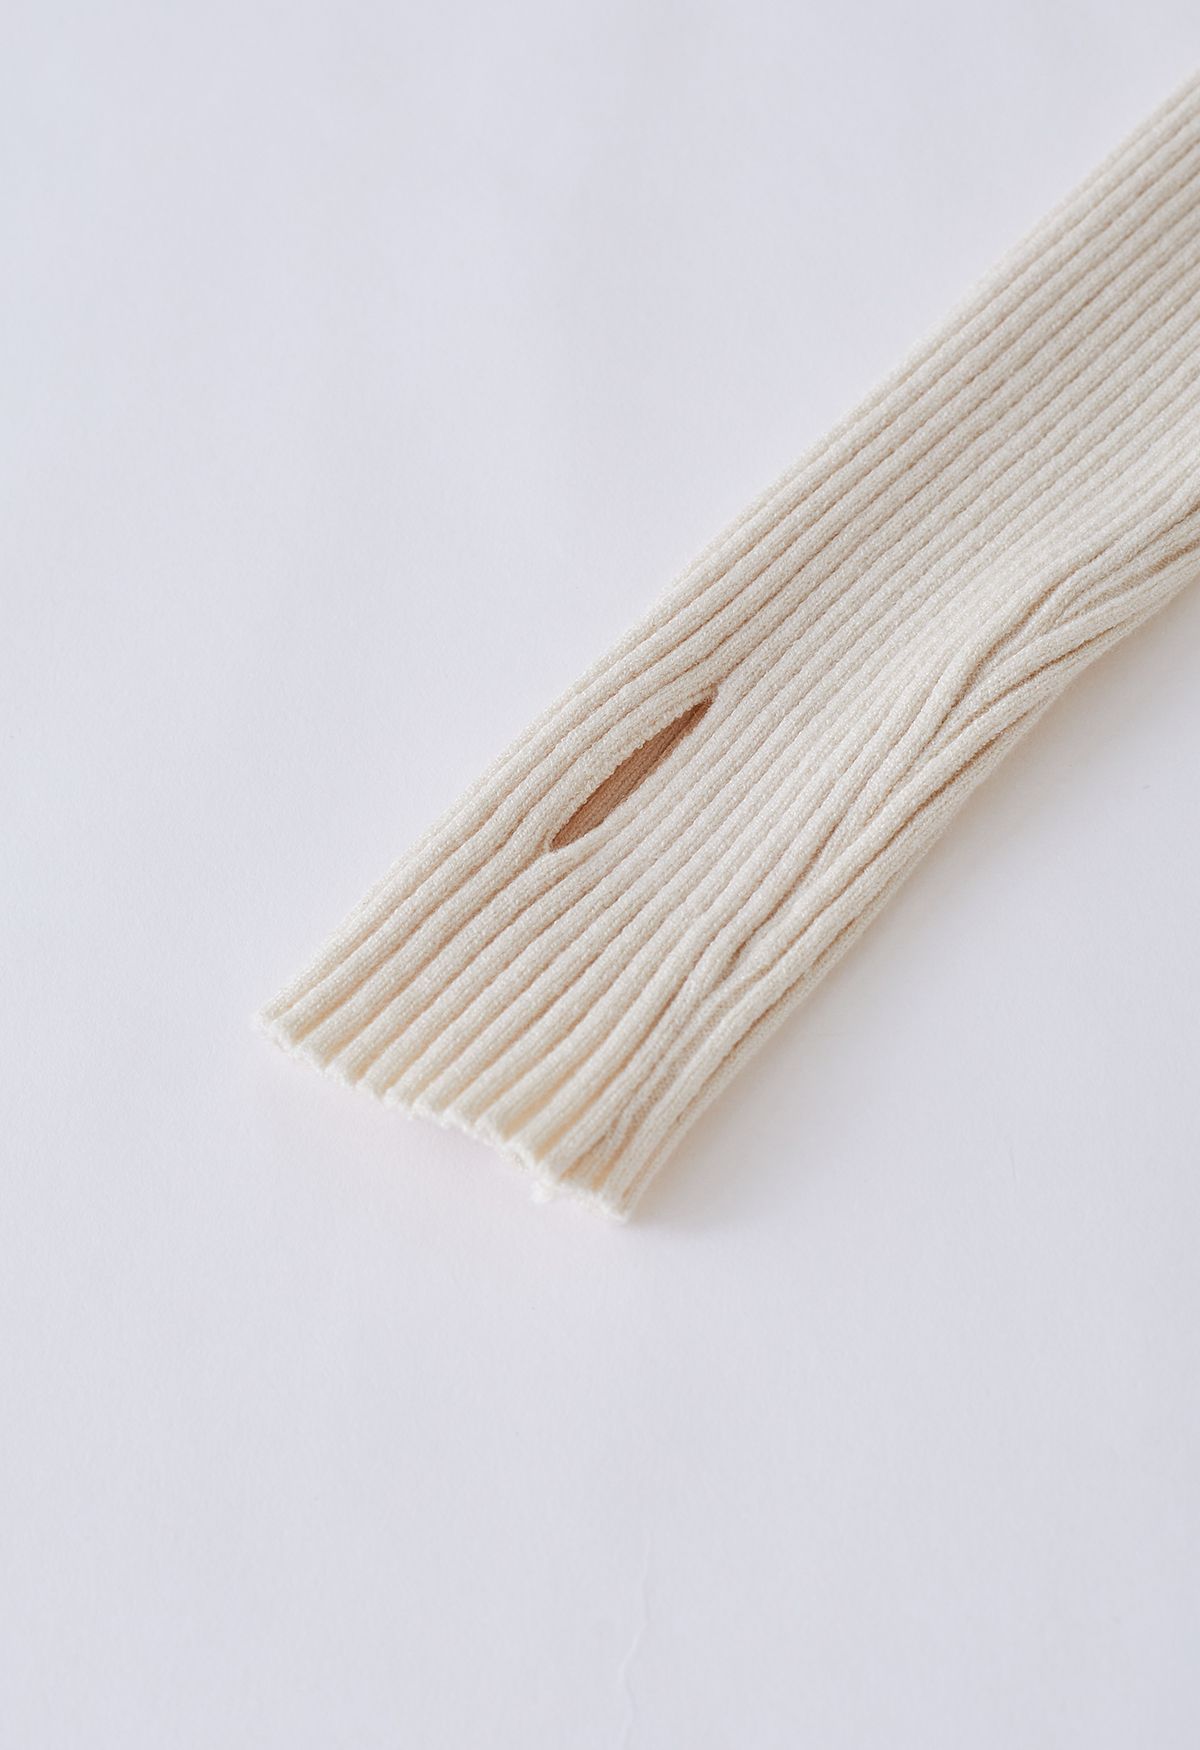 Mock Neck Ribbed Knit Twinset Top in Cream